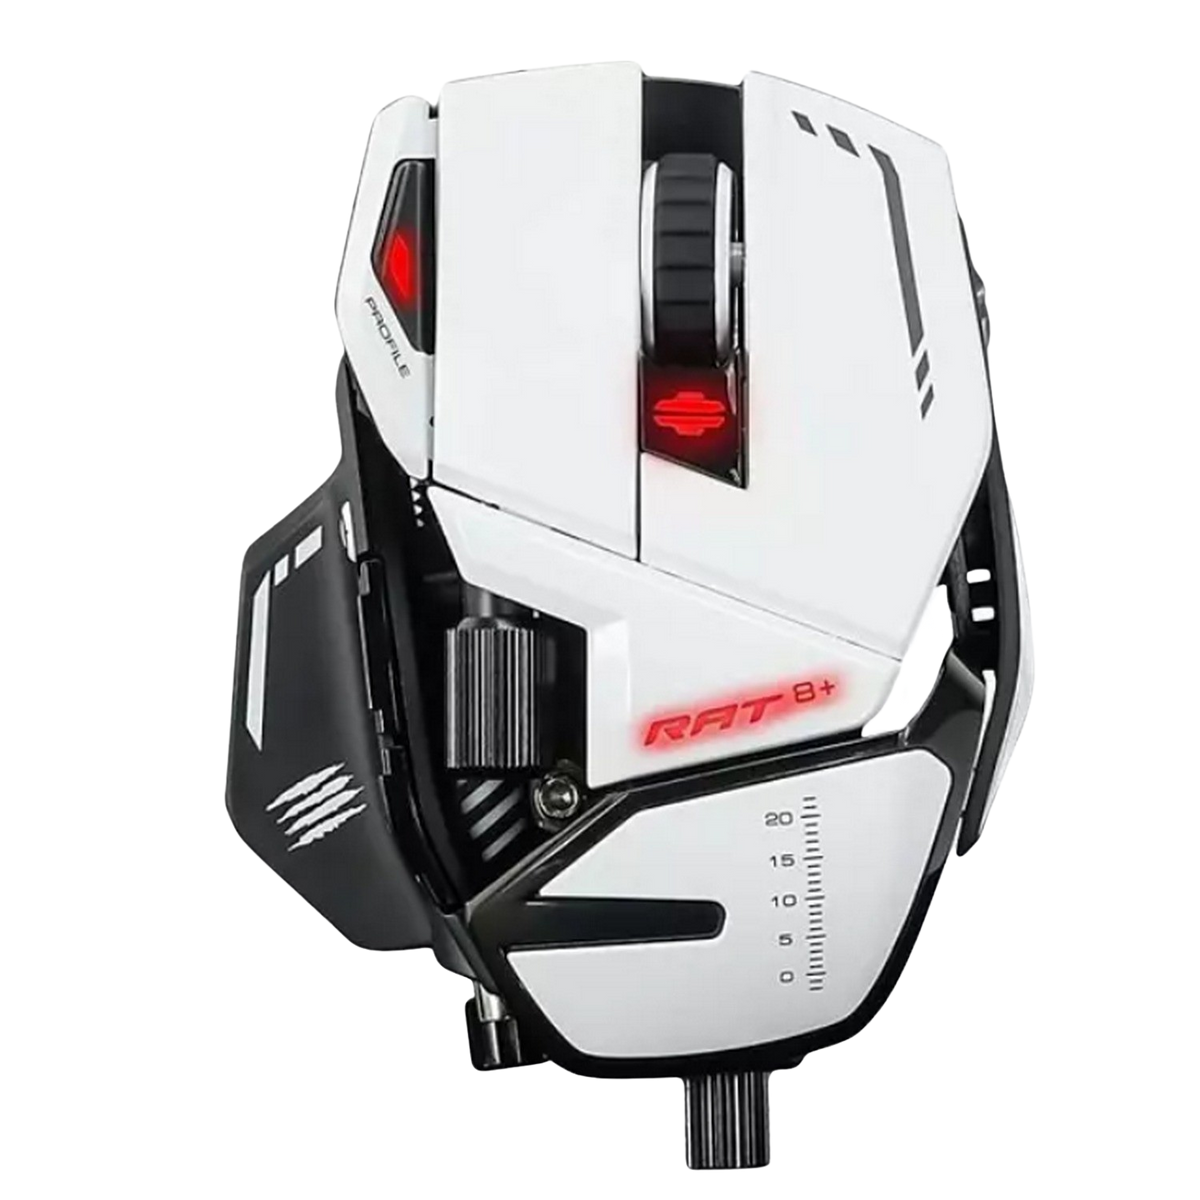 MAD CATZ Maus, R.A.T. Weiß GAMING Gaming WH MOUSE, 8+ OPTICAL MR05DCINWH000-0